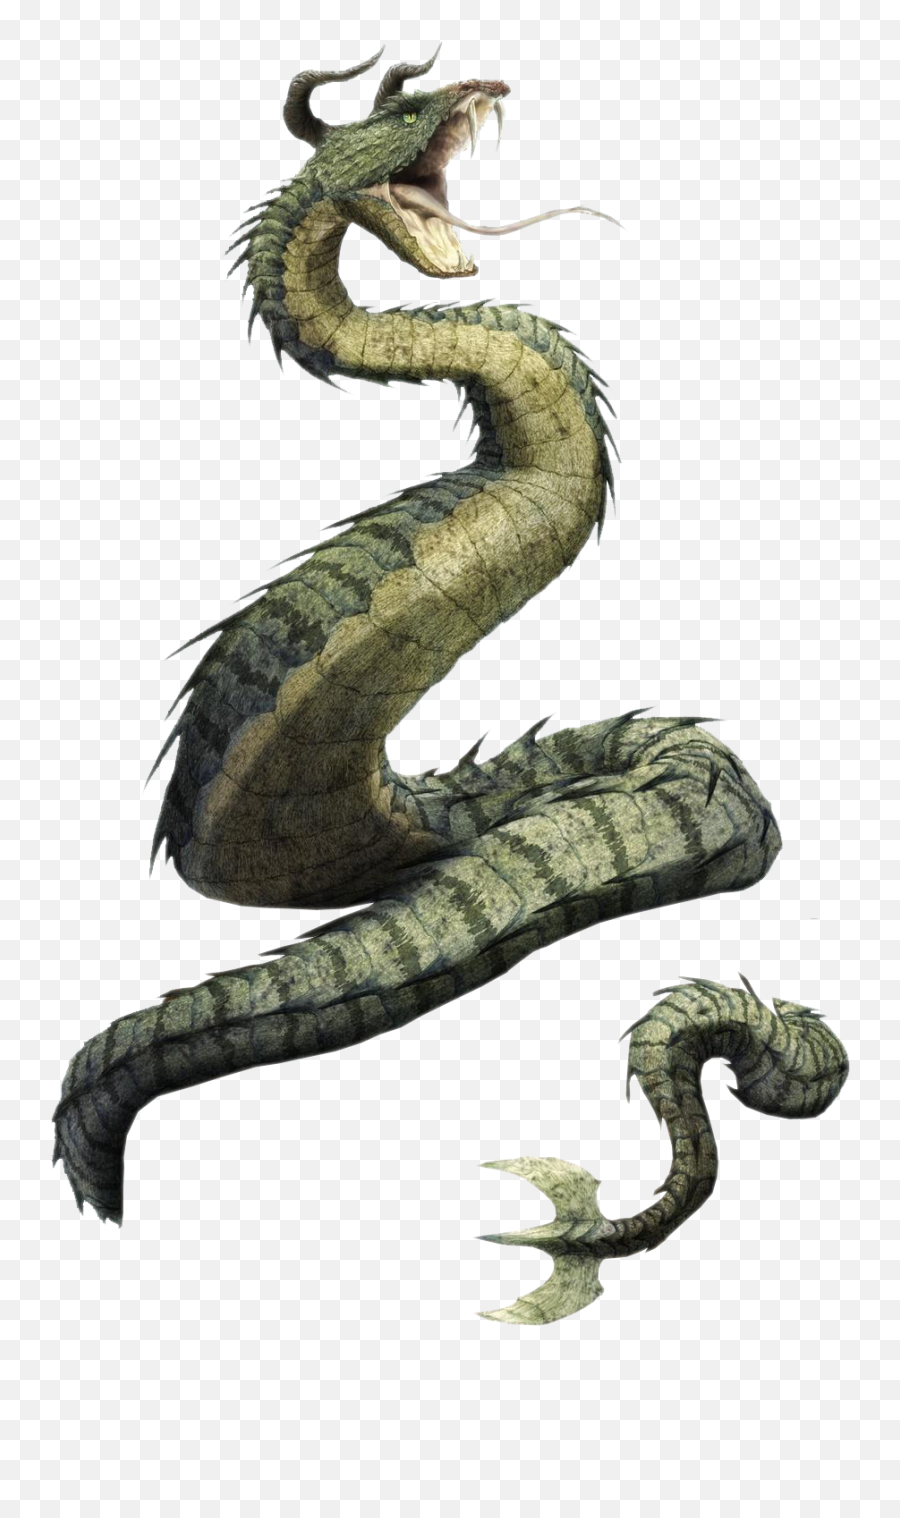 Serpent Png 3 Image - Dragon Blade Wrath Of Fire,Serpent Png